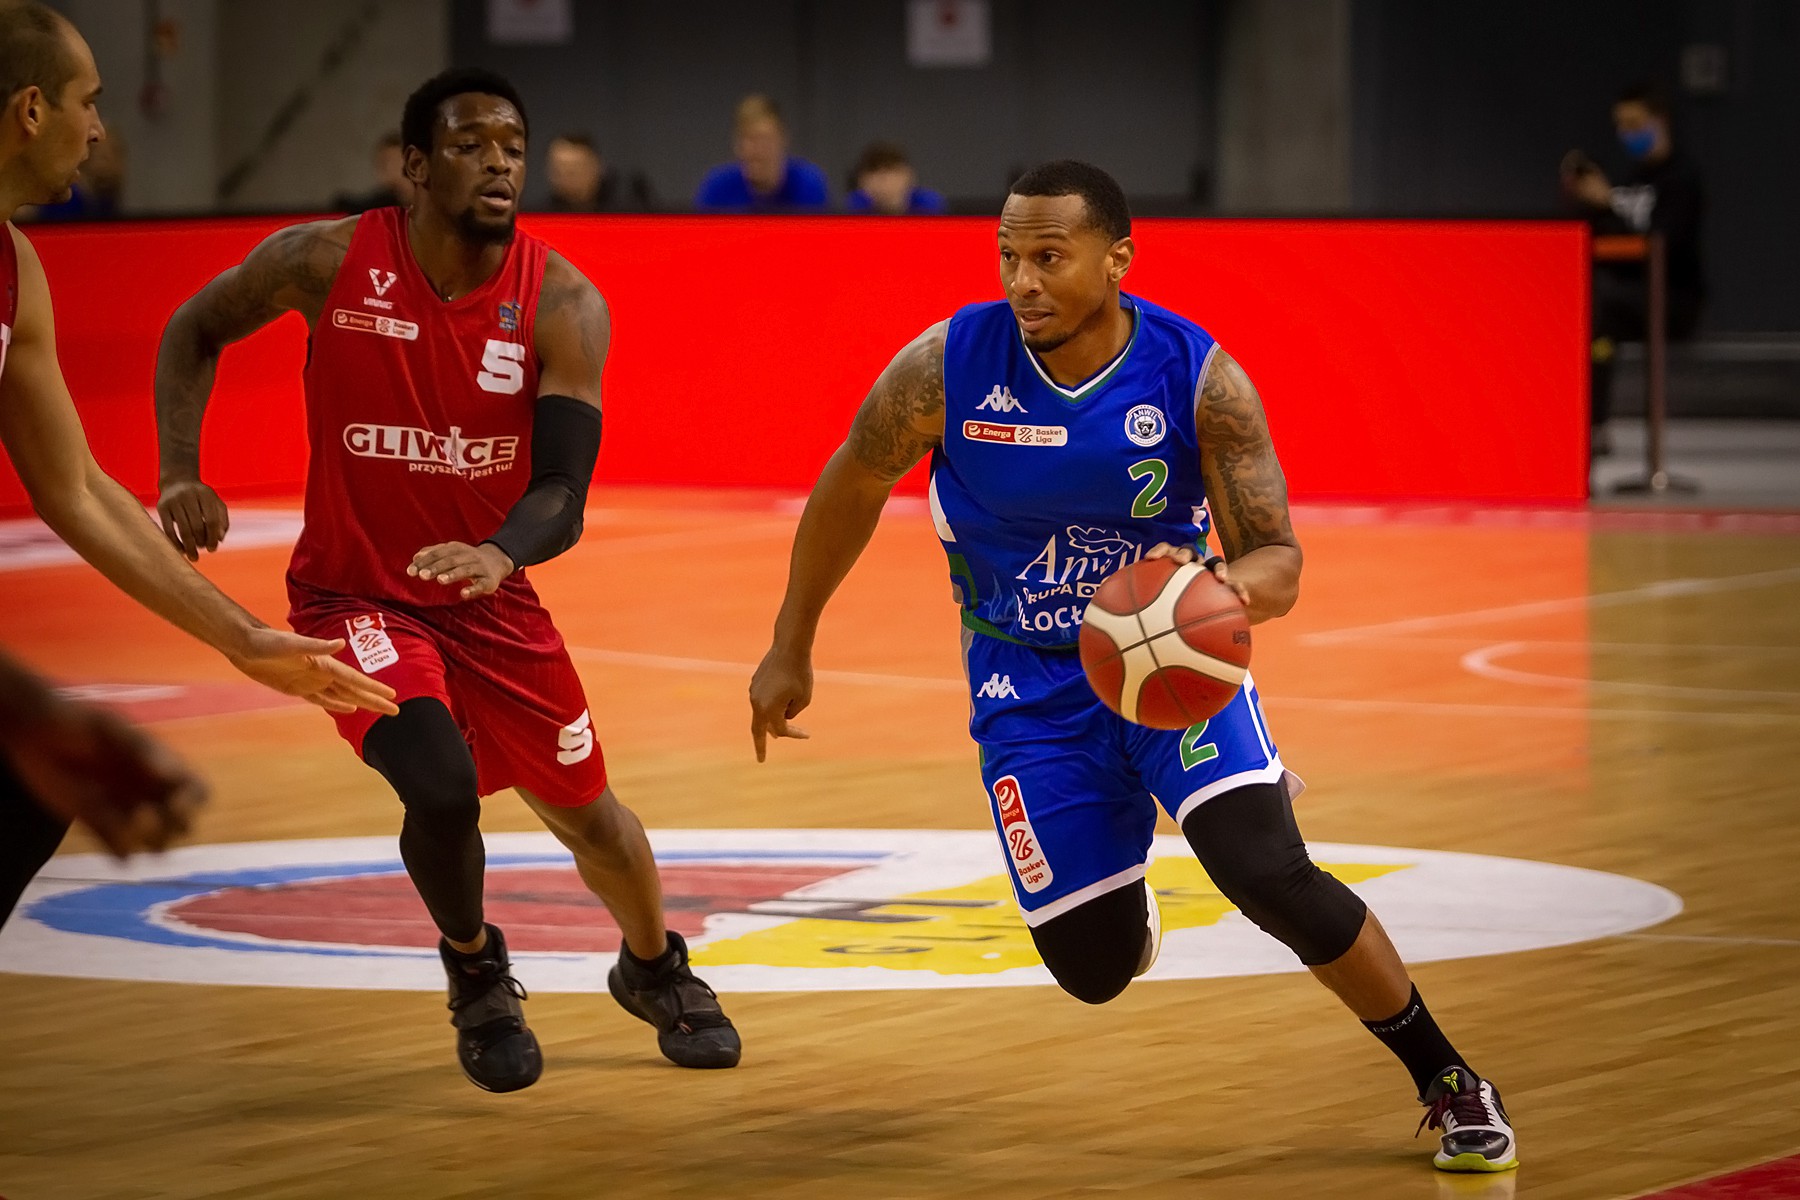 First Time This Year – Anwil Wins!